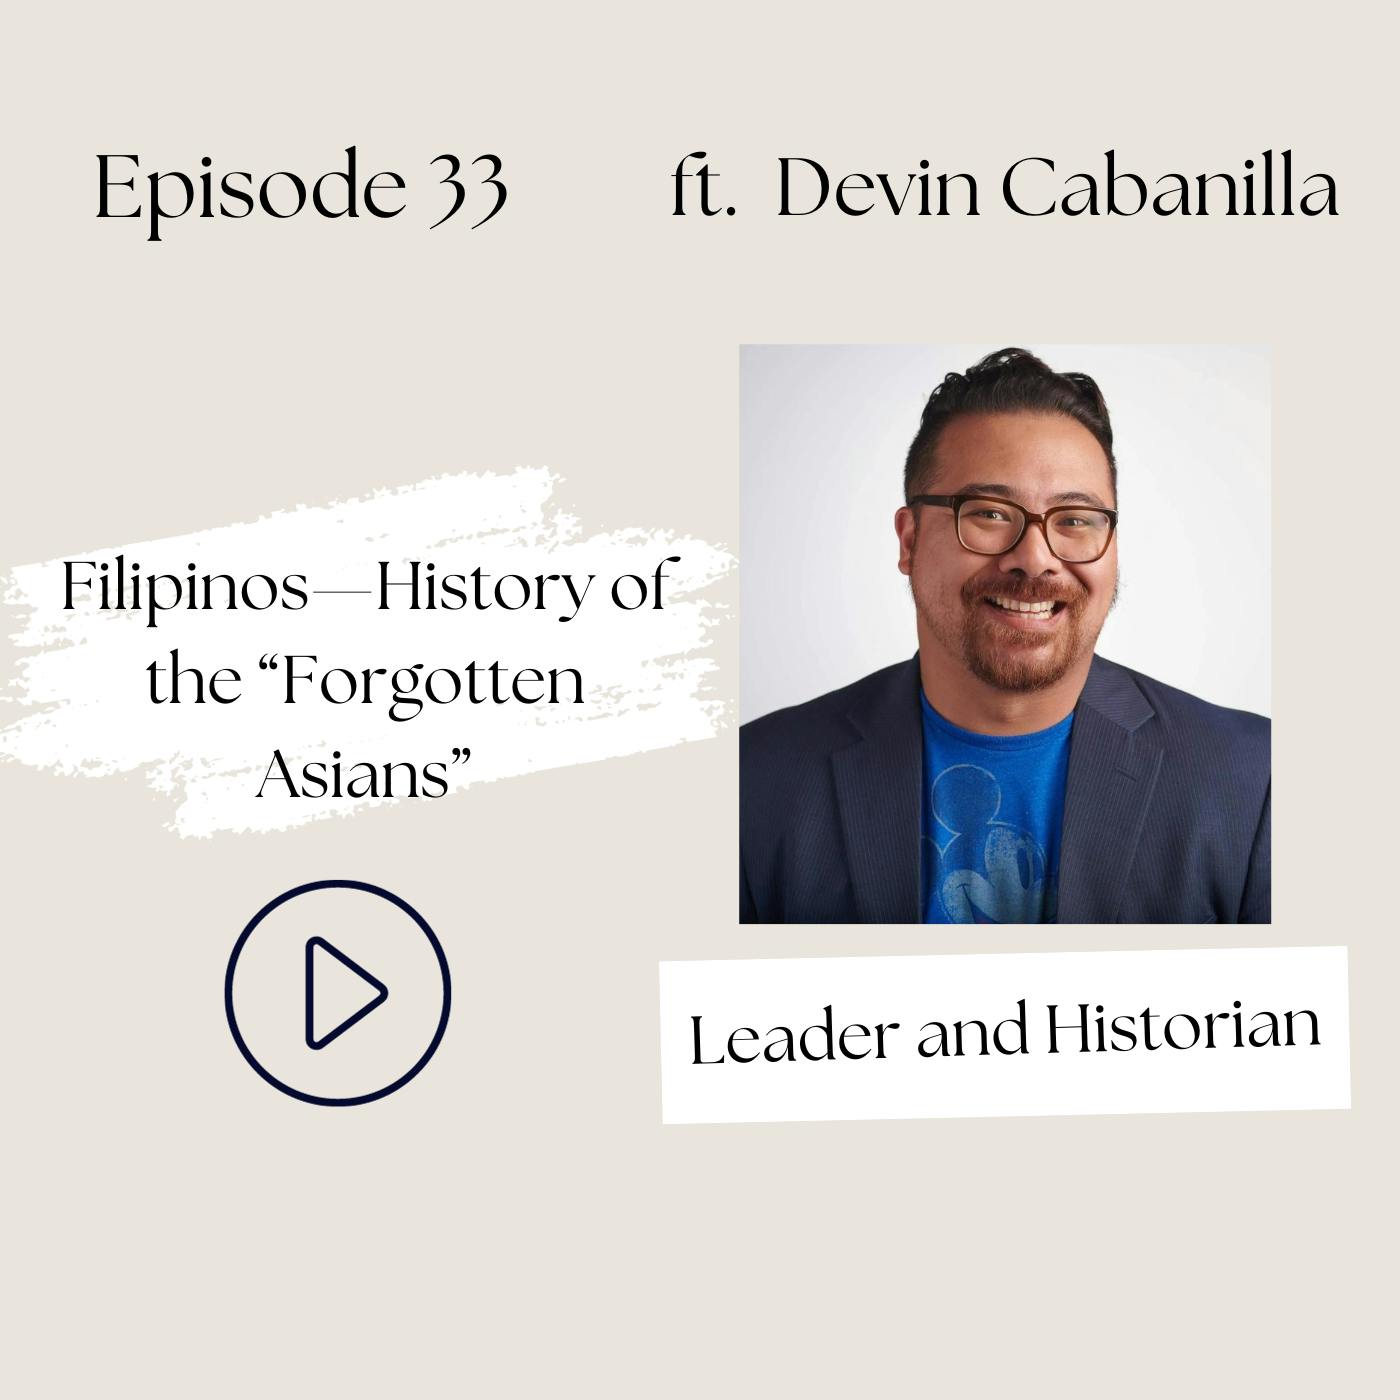 Filipinos— The Story of the “Forgotten Asians” (and how did we get SO MANY incredible Filipino nurses in healthcare?) (Devin Cabanilla, Ep 33)